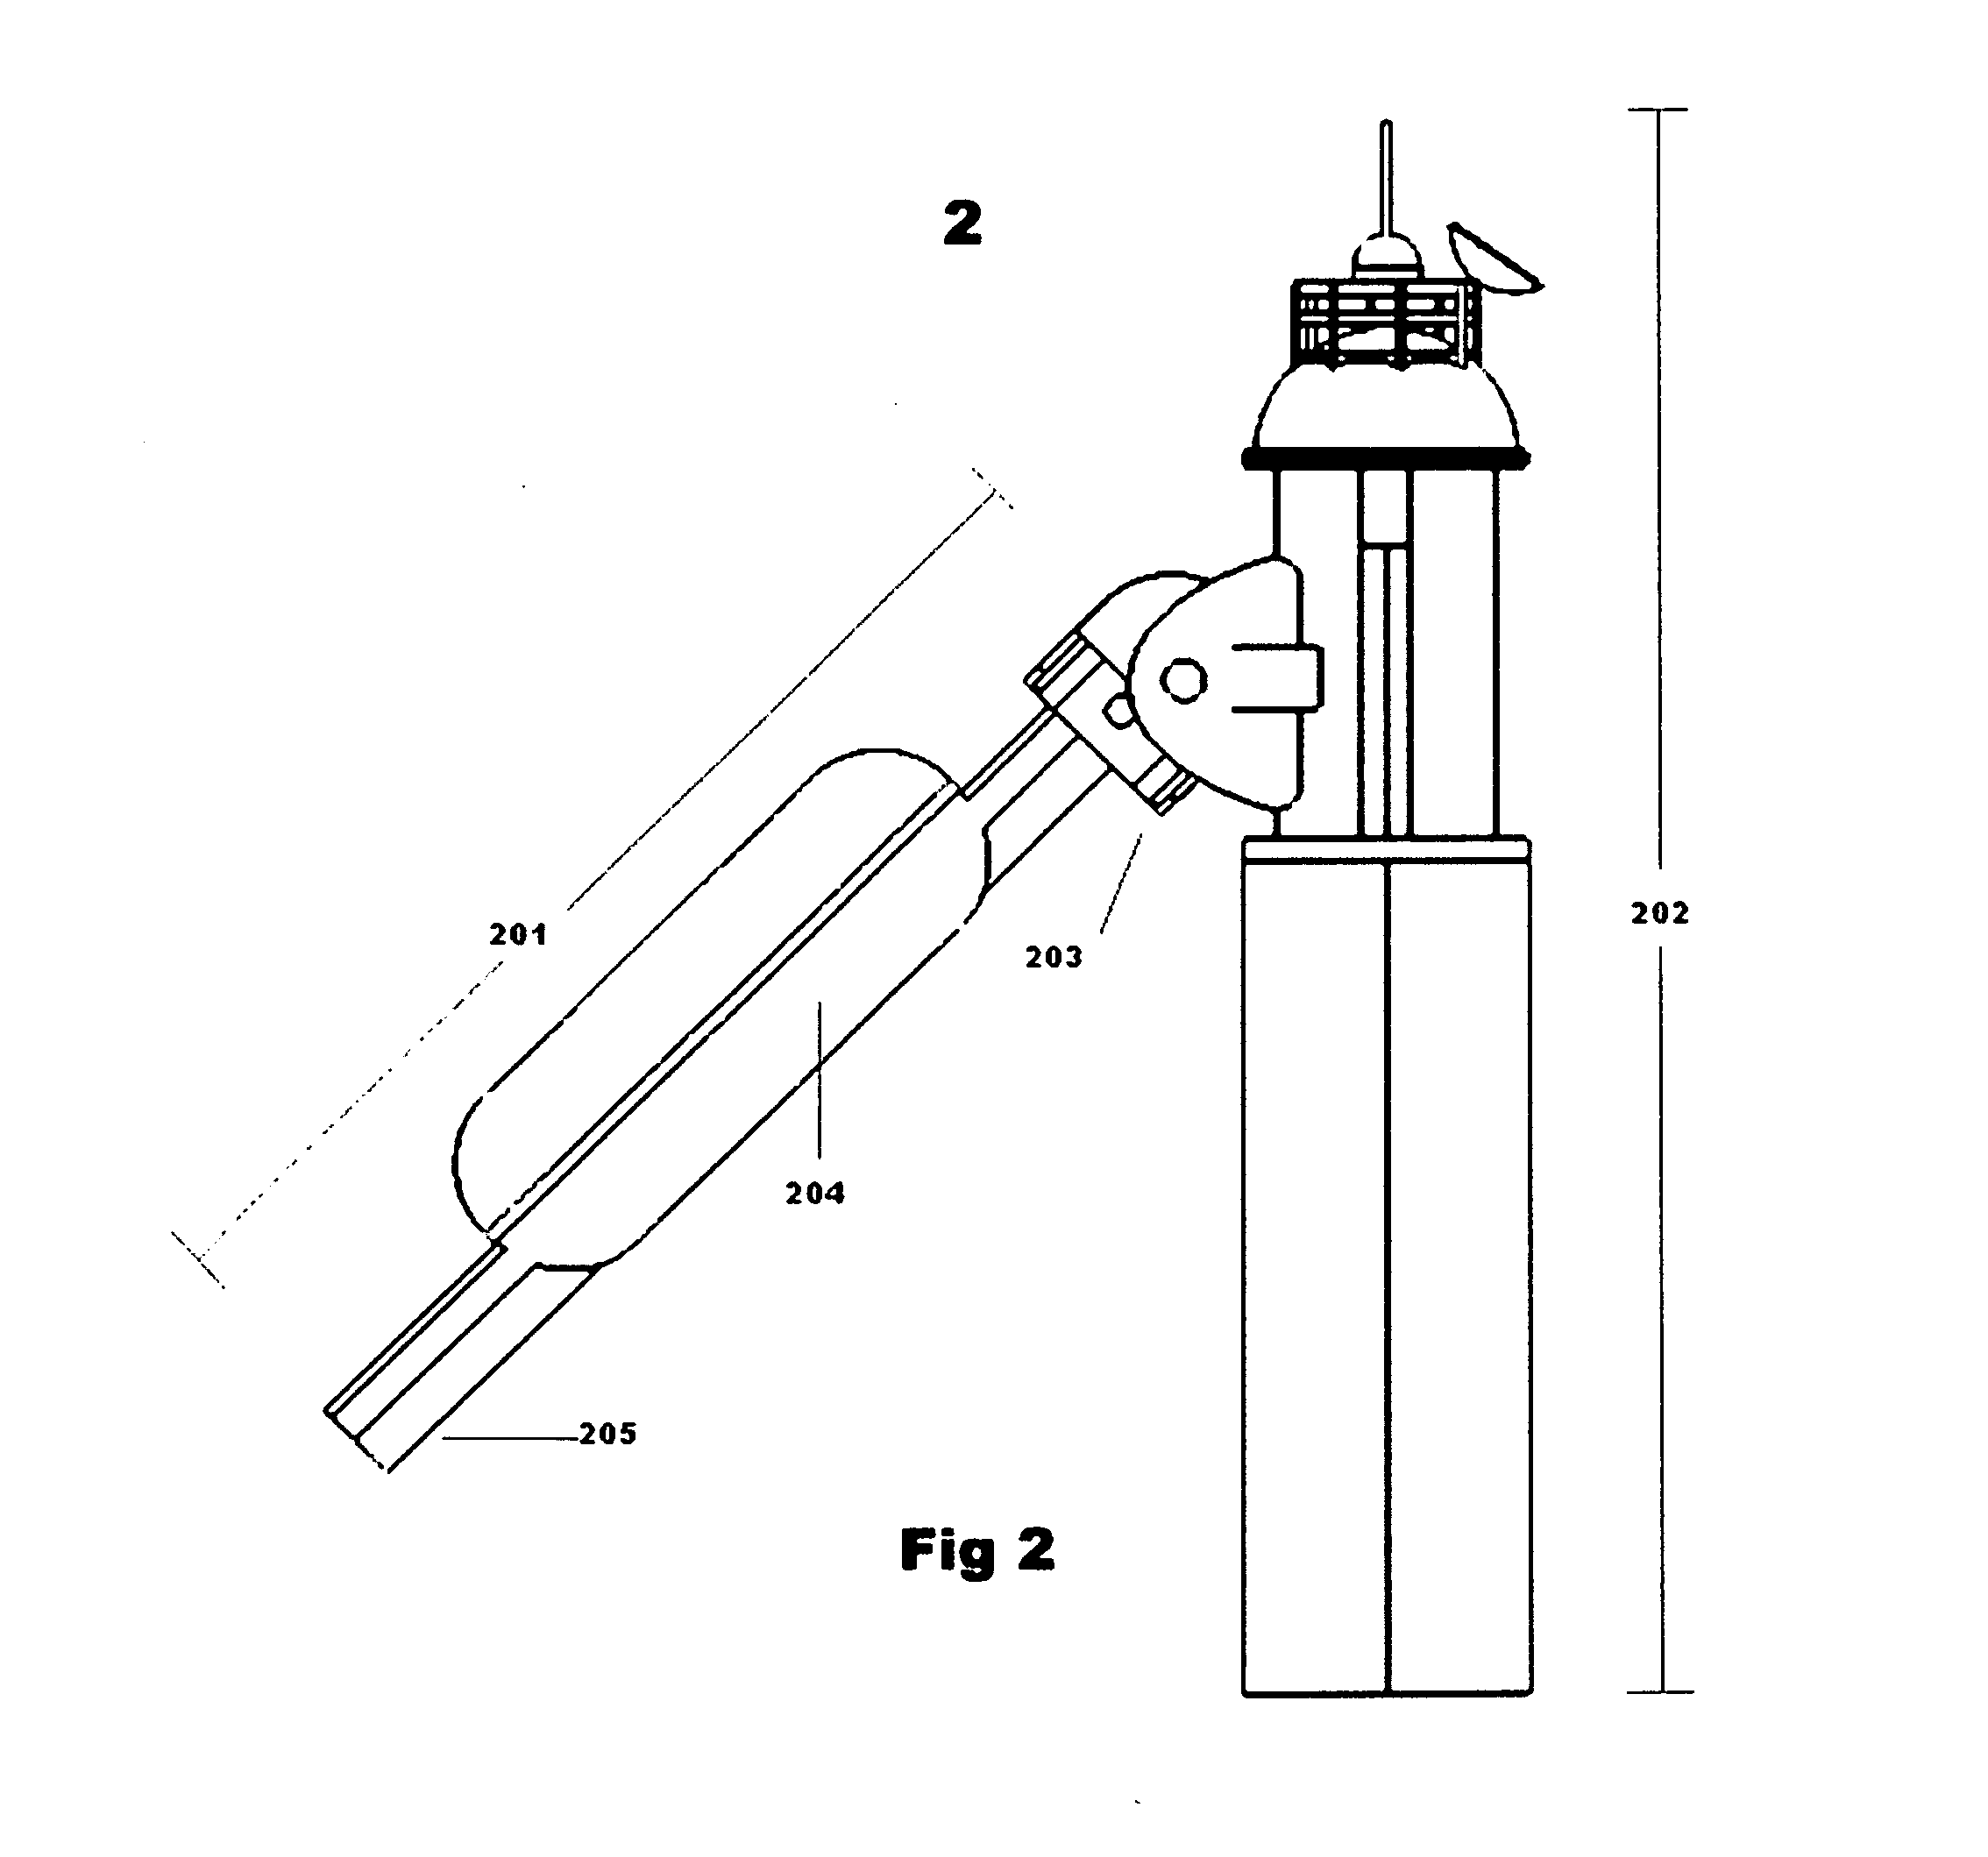 Trimming Right-Angularly Reorienting Extending Segmented Ocean Wave Power Extraction System